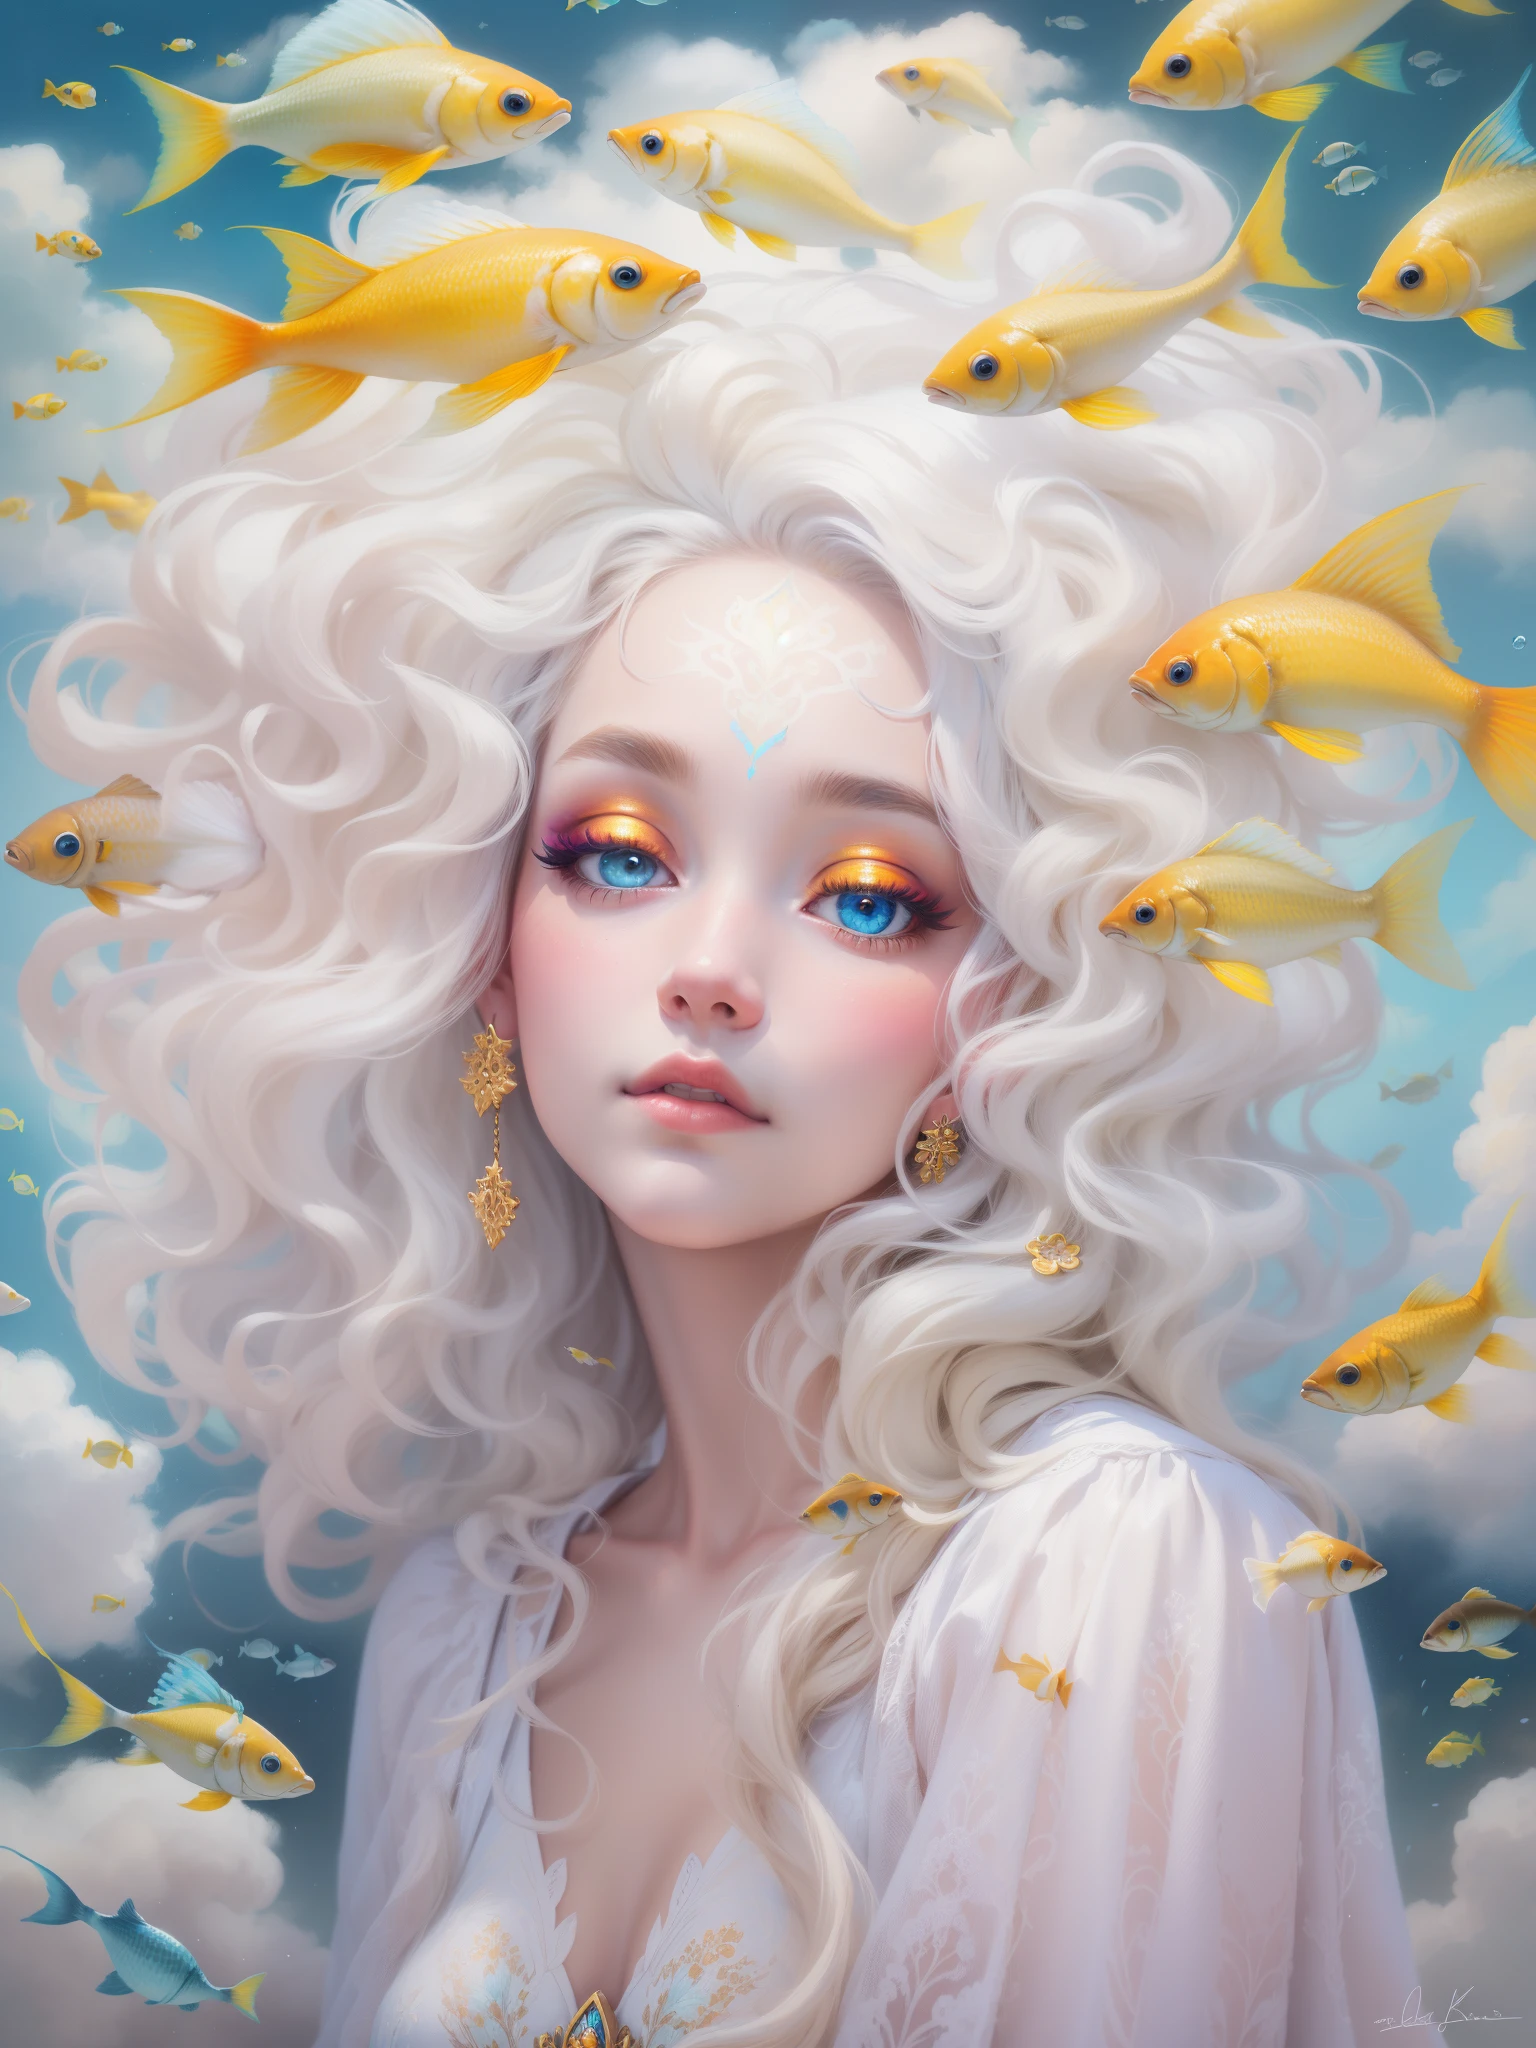 (most realistic, 4k, highres, masterpiece:1.2), oil paint, fantasy art:1.37, sky with fluffy clouds:1.37, (sad cloud goddess:1.37, bright eyes, light-colored hair, elaborate makeup, glowing skin, sheer clothing, surrounded by a school of fish:1.37), backlit, Gustav Klimt-style artwork, whimsical art style, in a white cloud paradise, beautiful fantasy art portrait